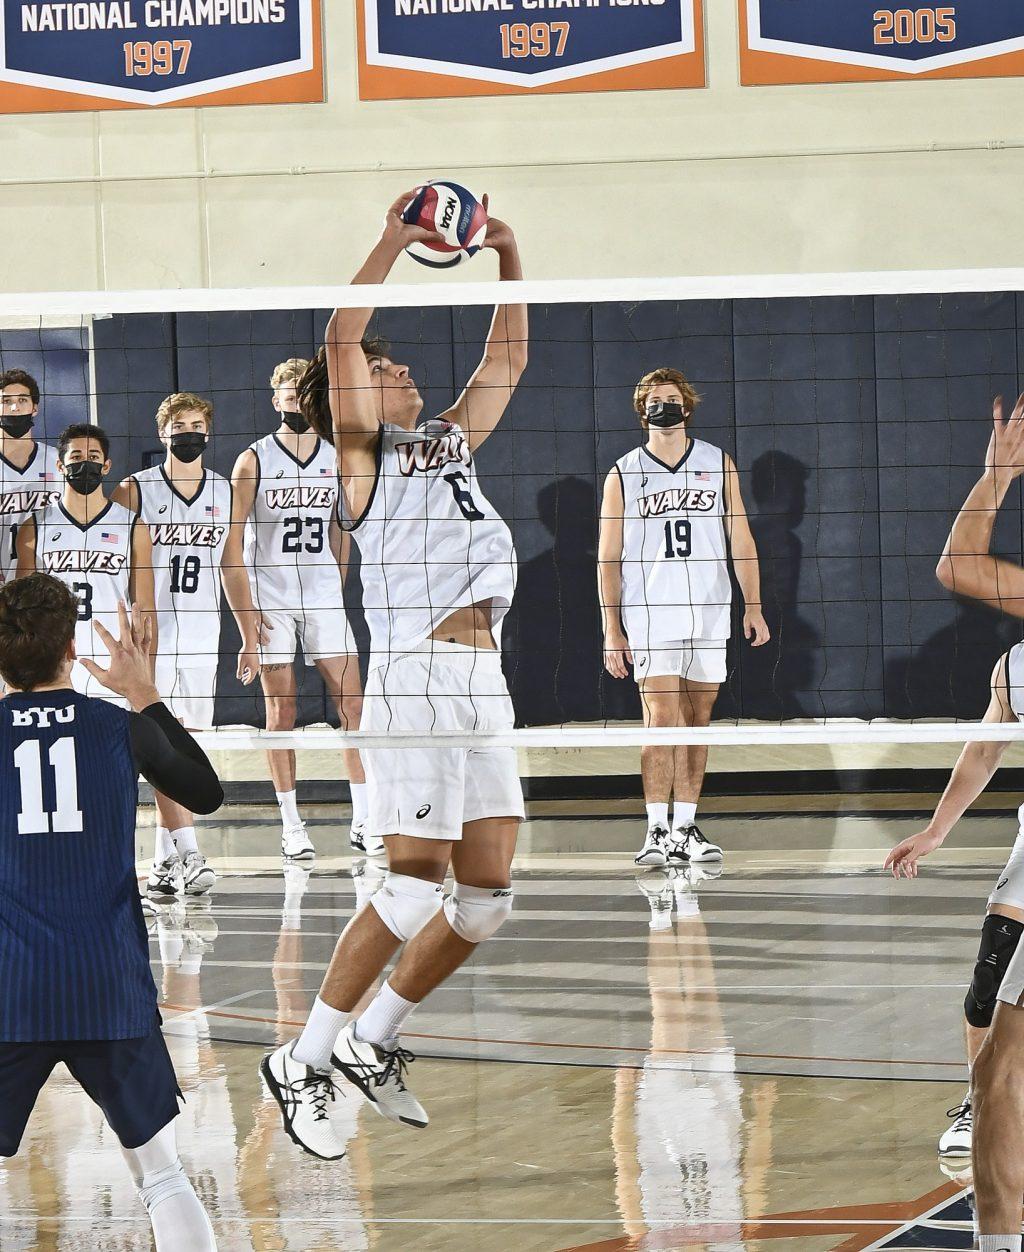 Freshman setter Bryce Dvorak delivers a set to a Waves teammate Friday. Dvorak finished with 33 assists and 6 digs in a four-set loss. Photo courtesy of Martin A. Folb | Pepperdine Athletics